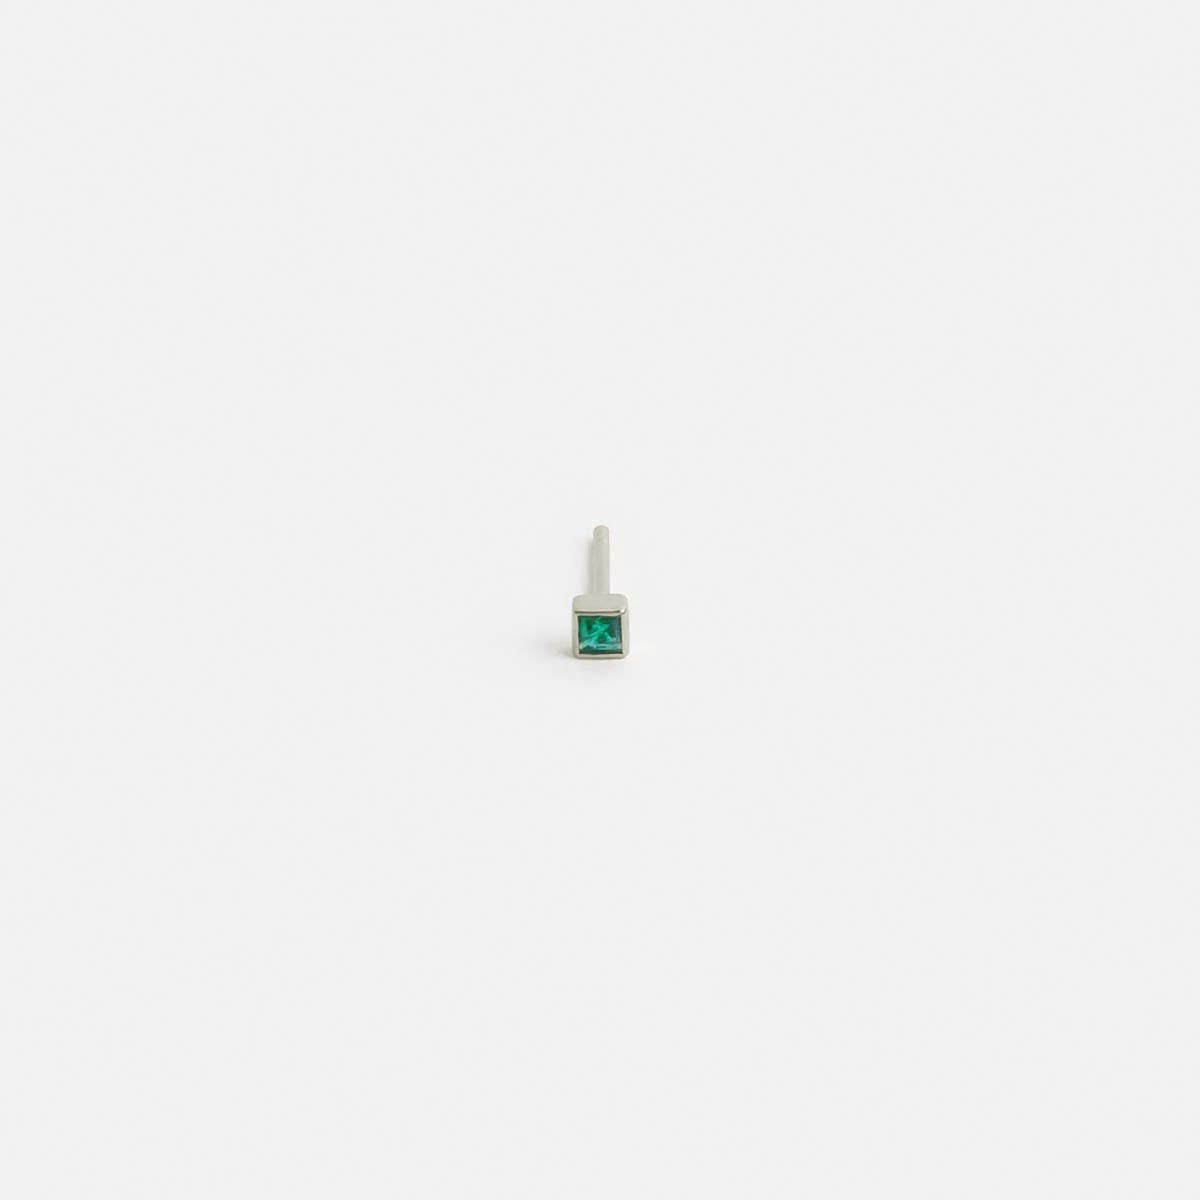 Small Minimal Ona Bar Stud in 14k White Gold set with Emerald By SHW Fine Jewelry NYC